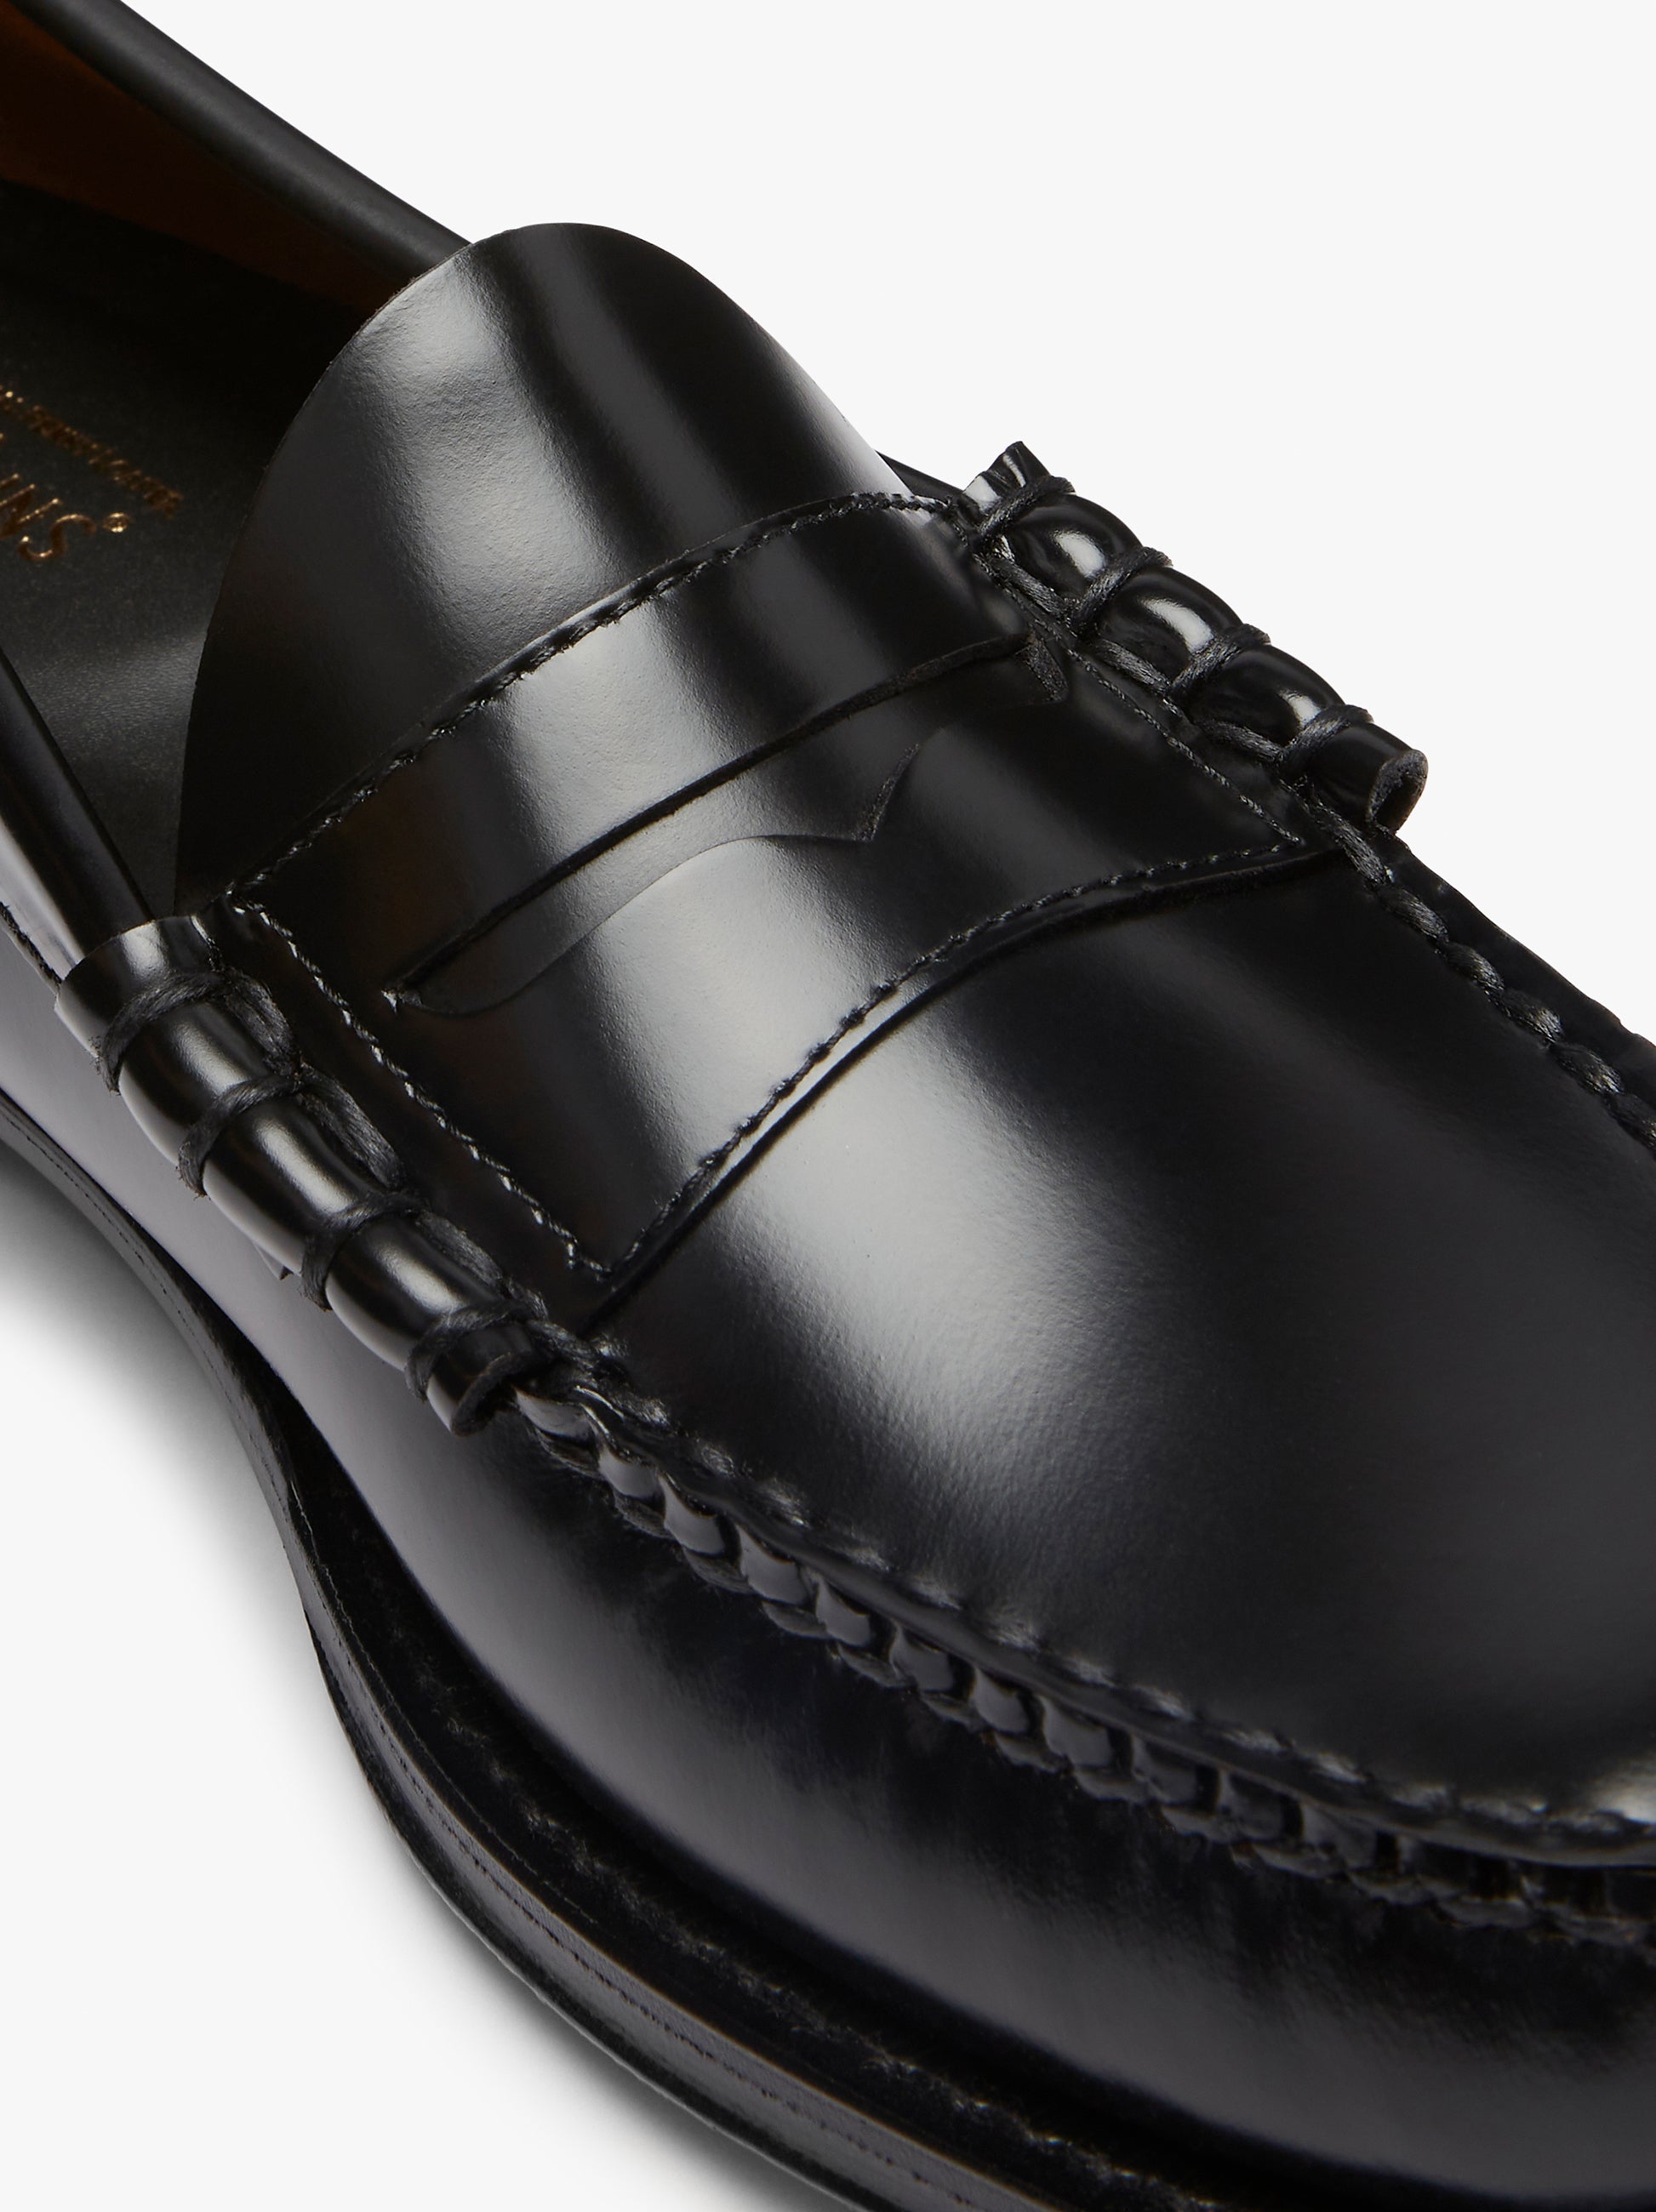 Black Leather Loafer Shoes Mens | Bass Weejuns Larson – G.H.BASS 1876